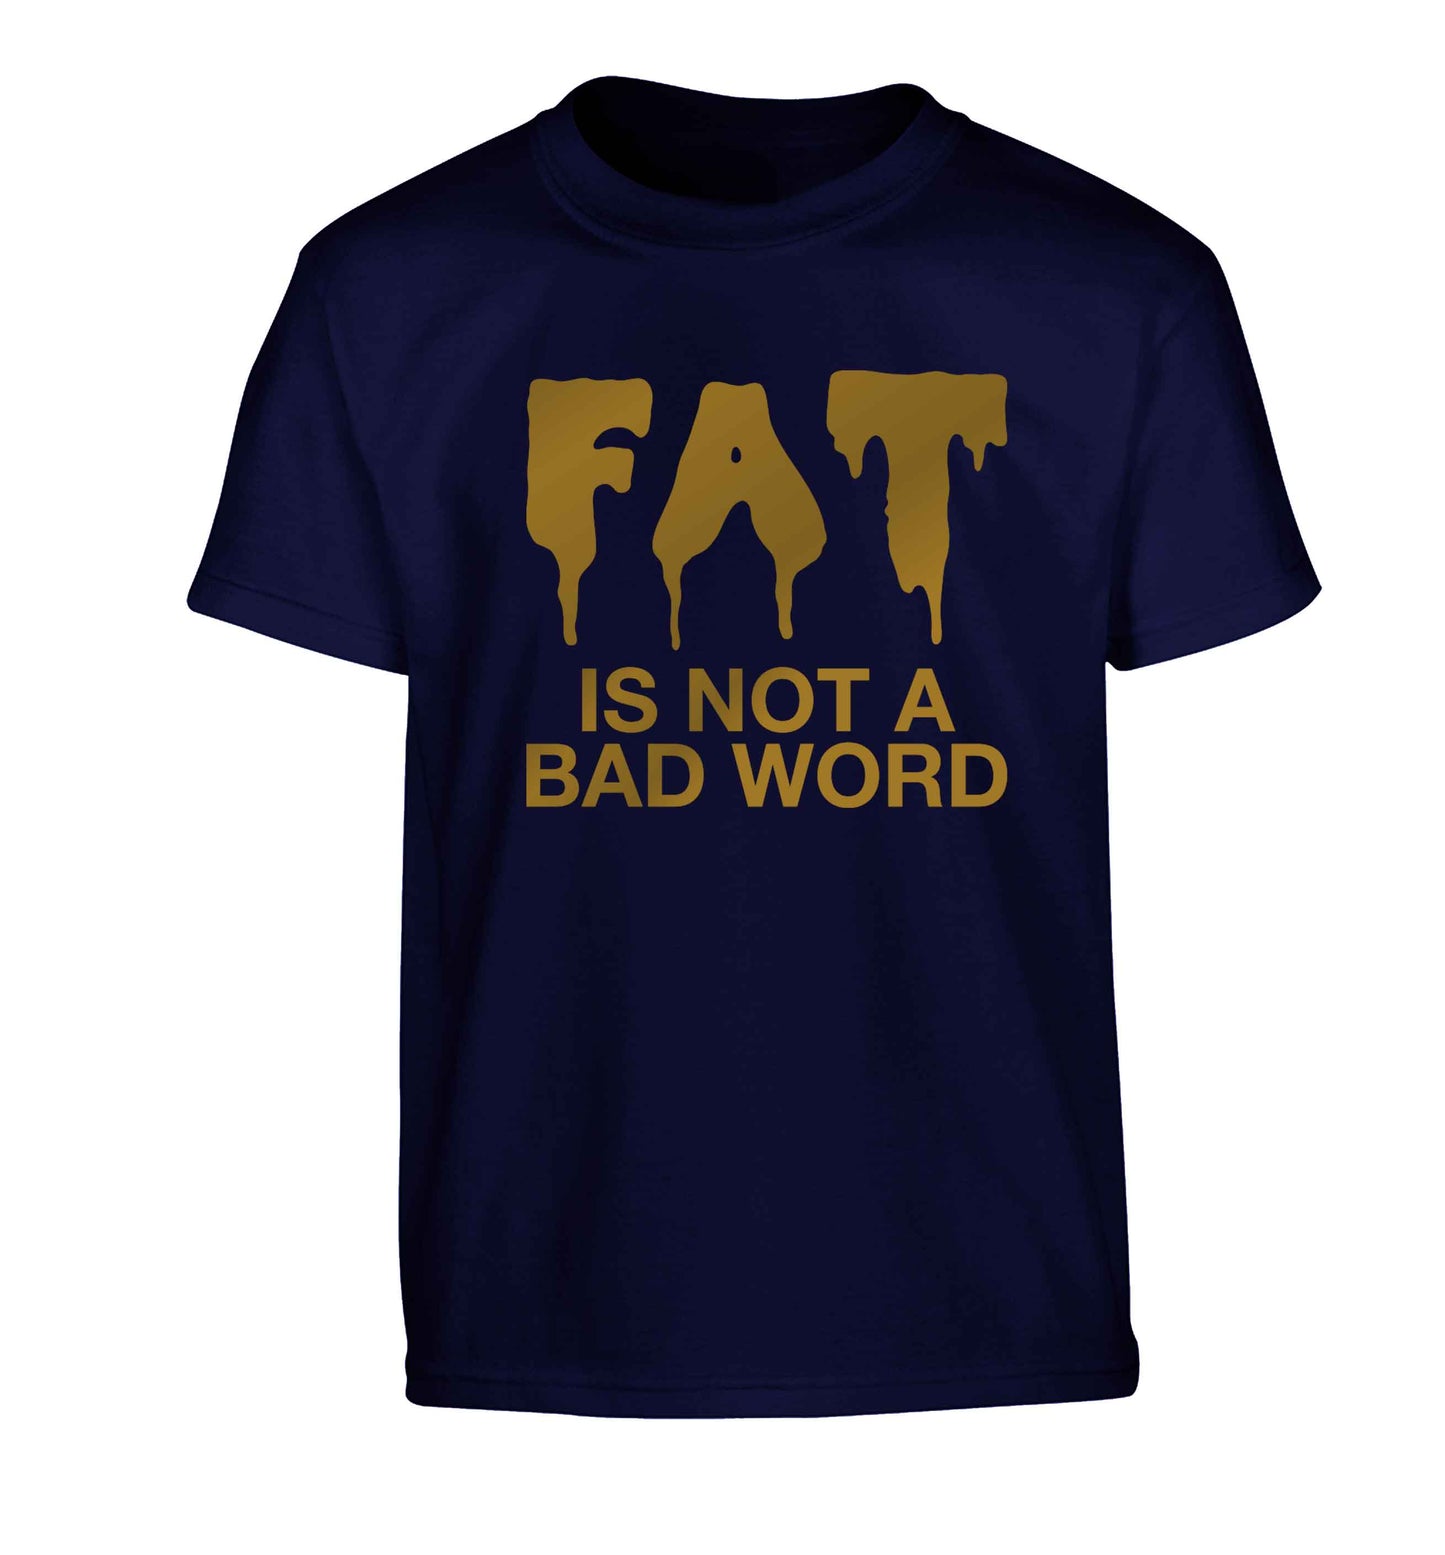 Fat is not a bad word Children's navy Tshirt 12-13 Years